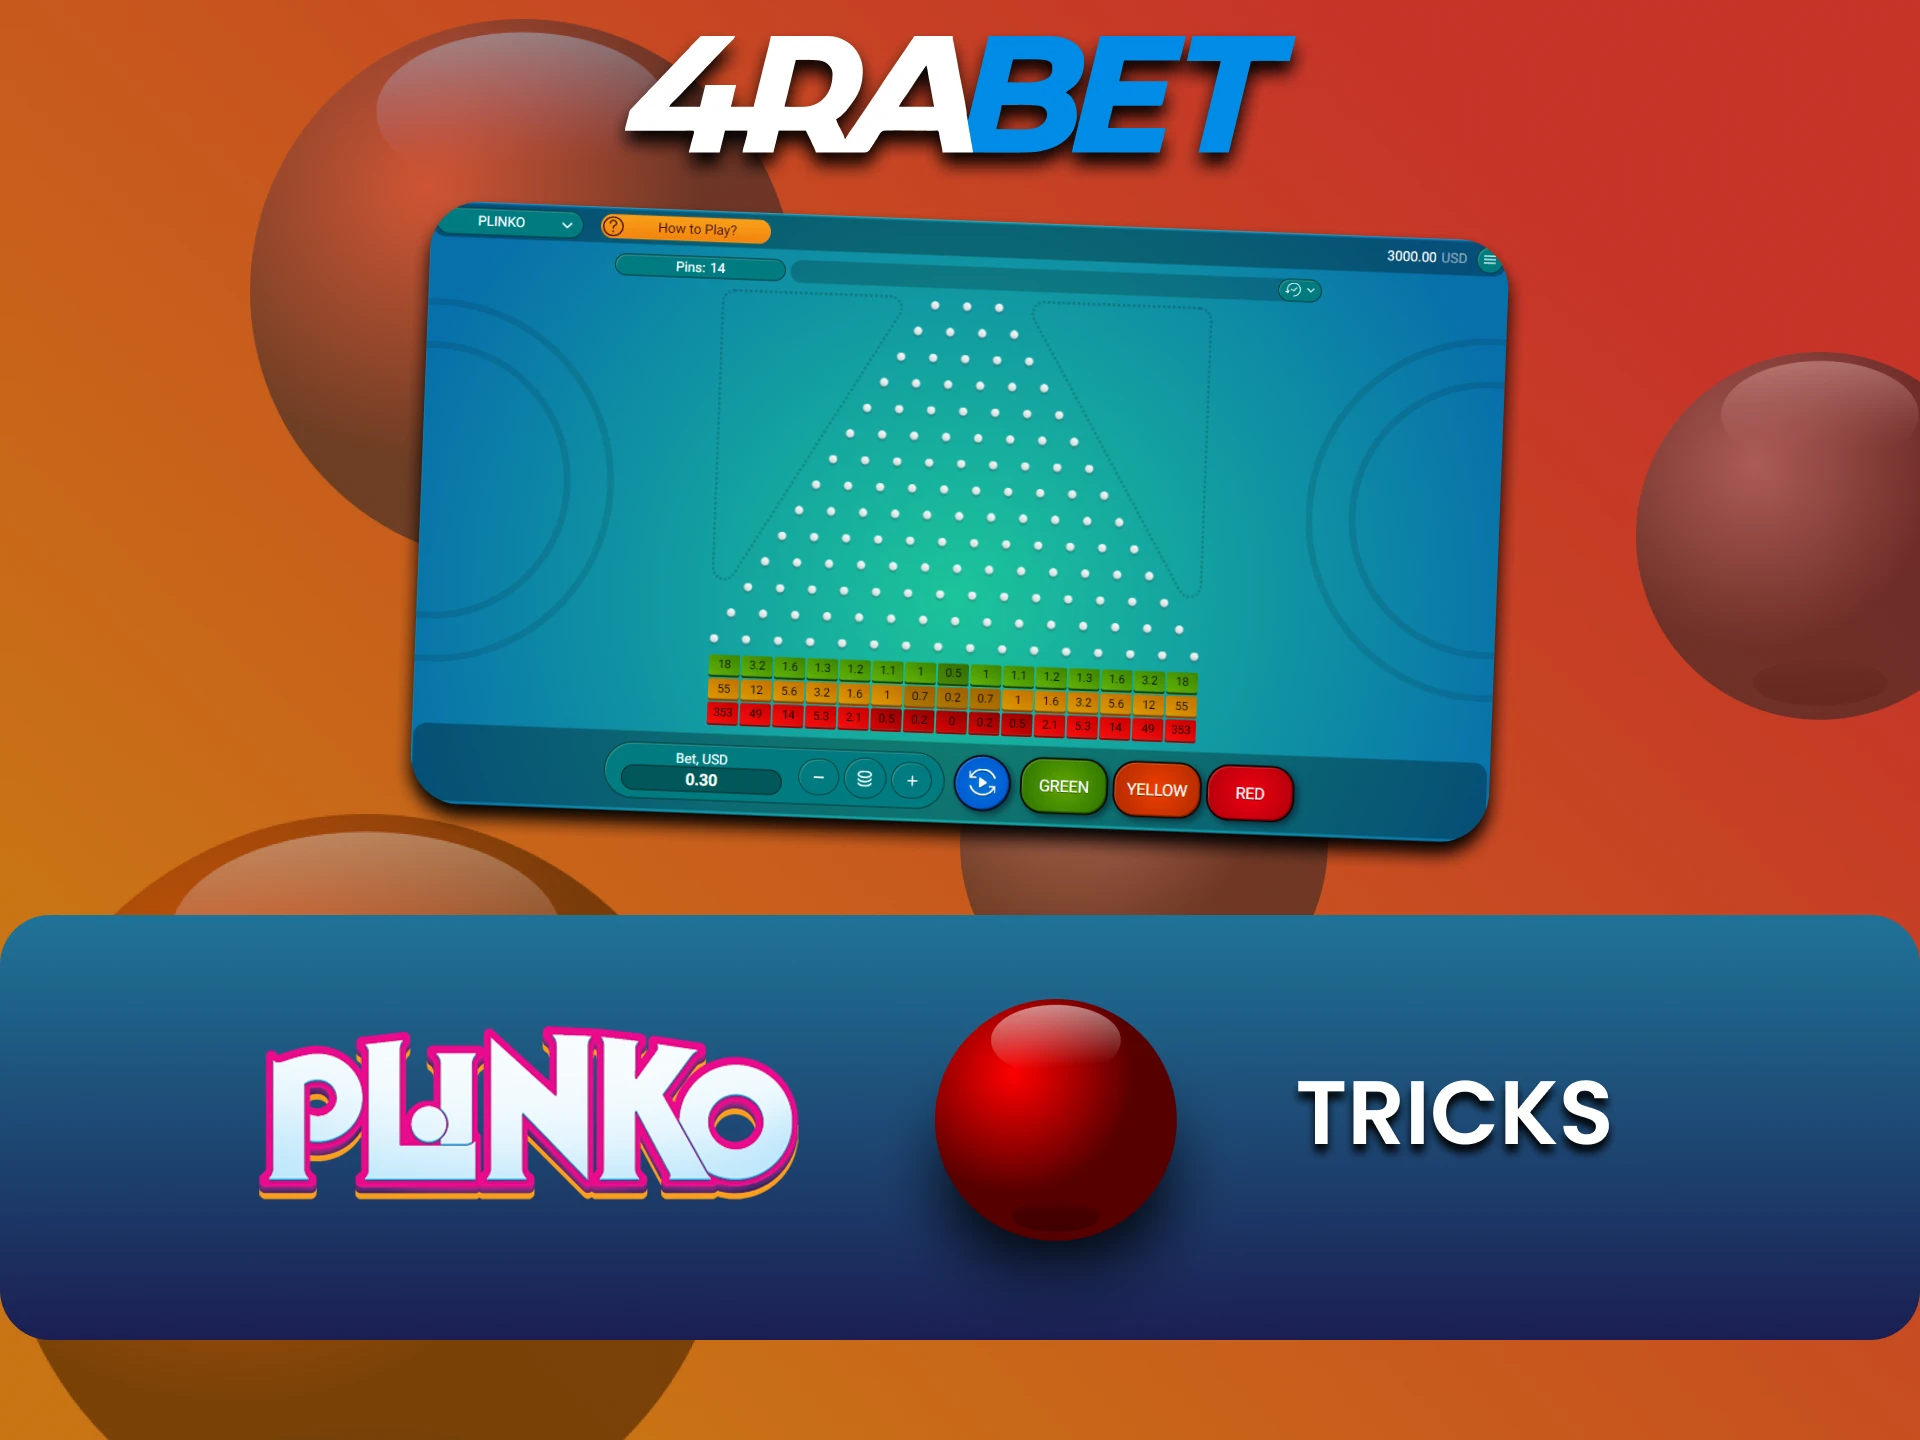 Find out about possible tricks in Plinko at 4rabet.